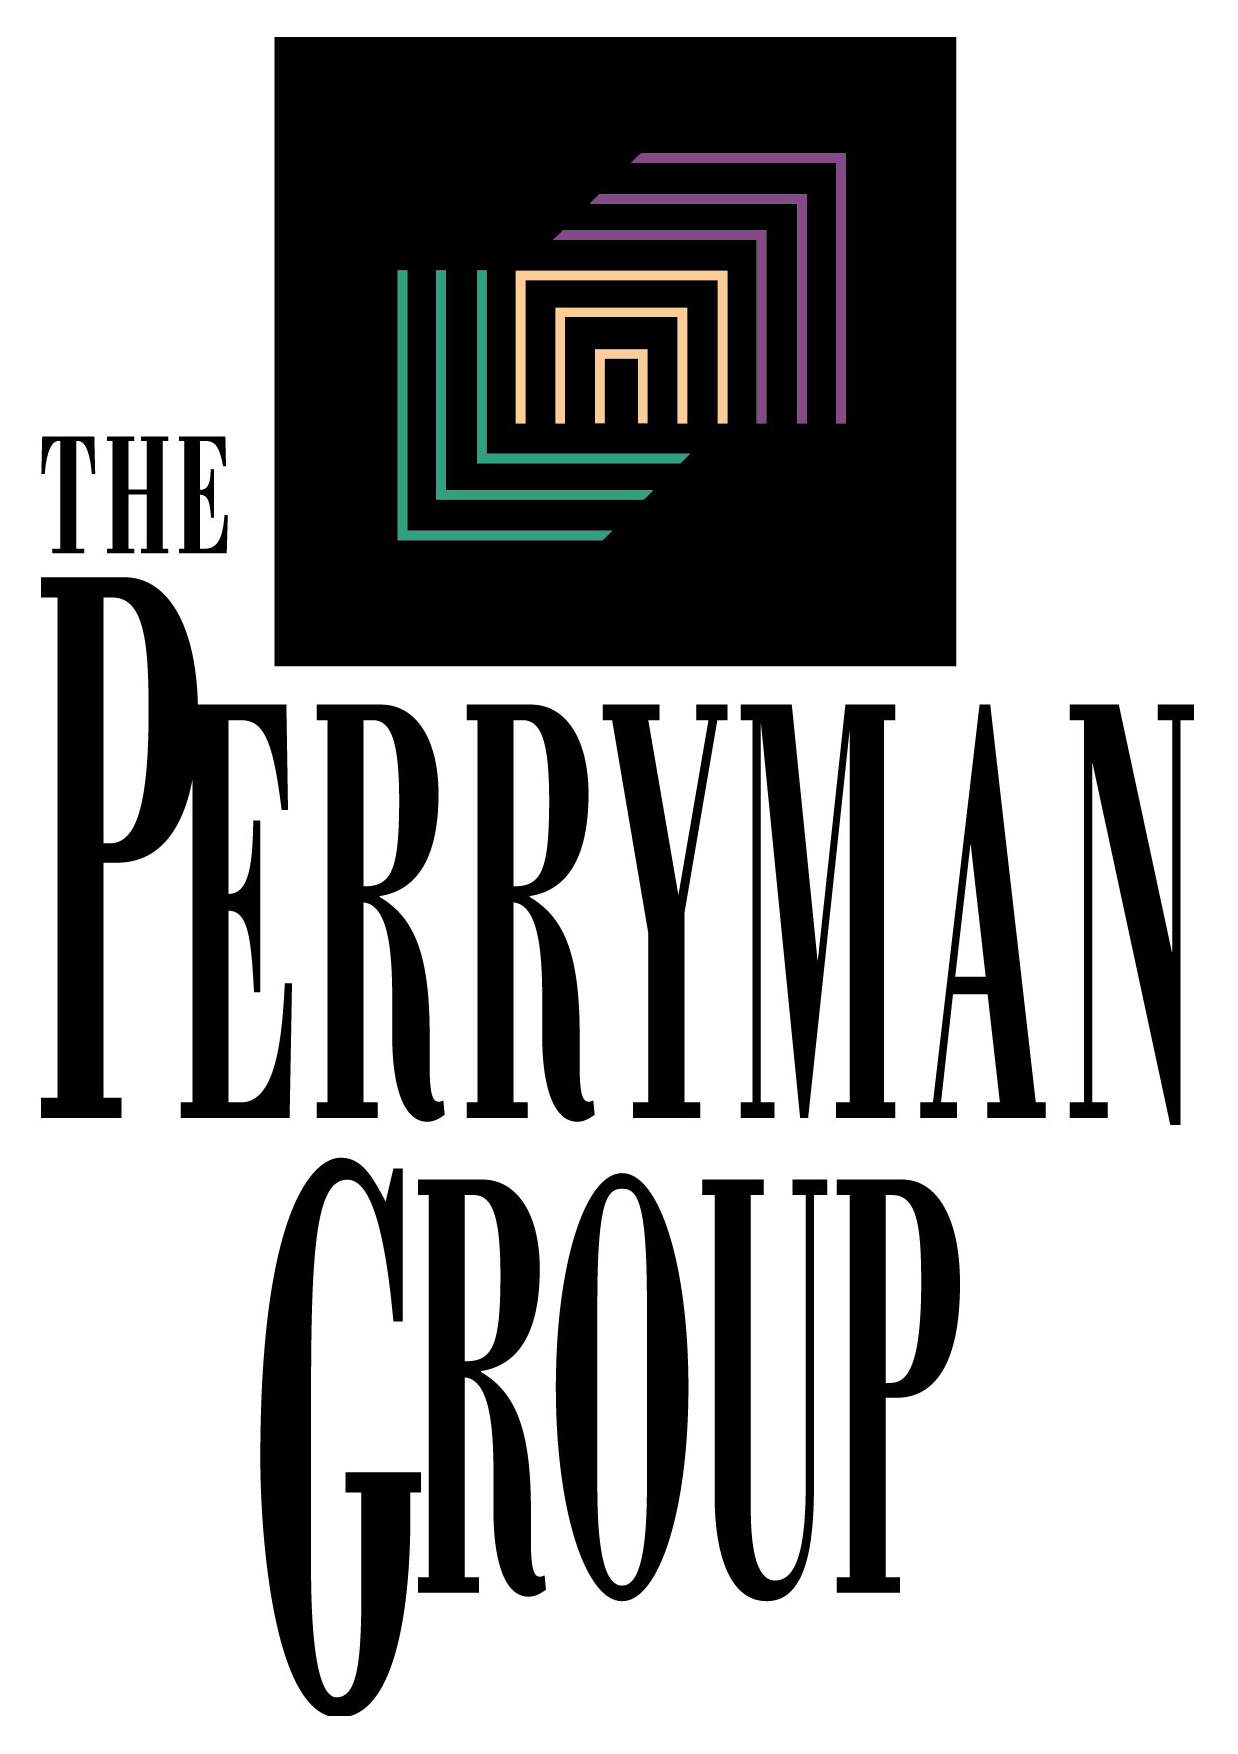 The Perryman Group logo